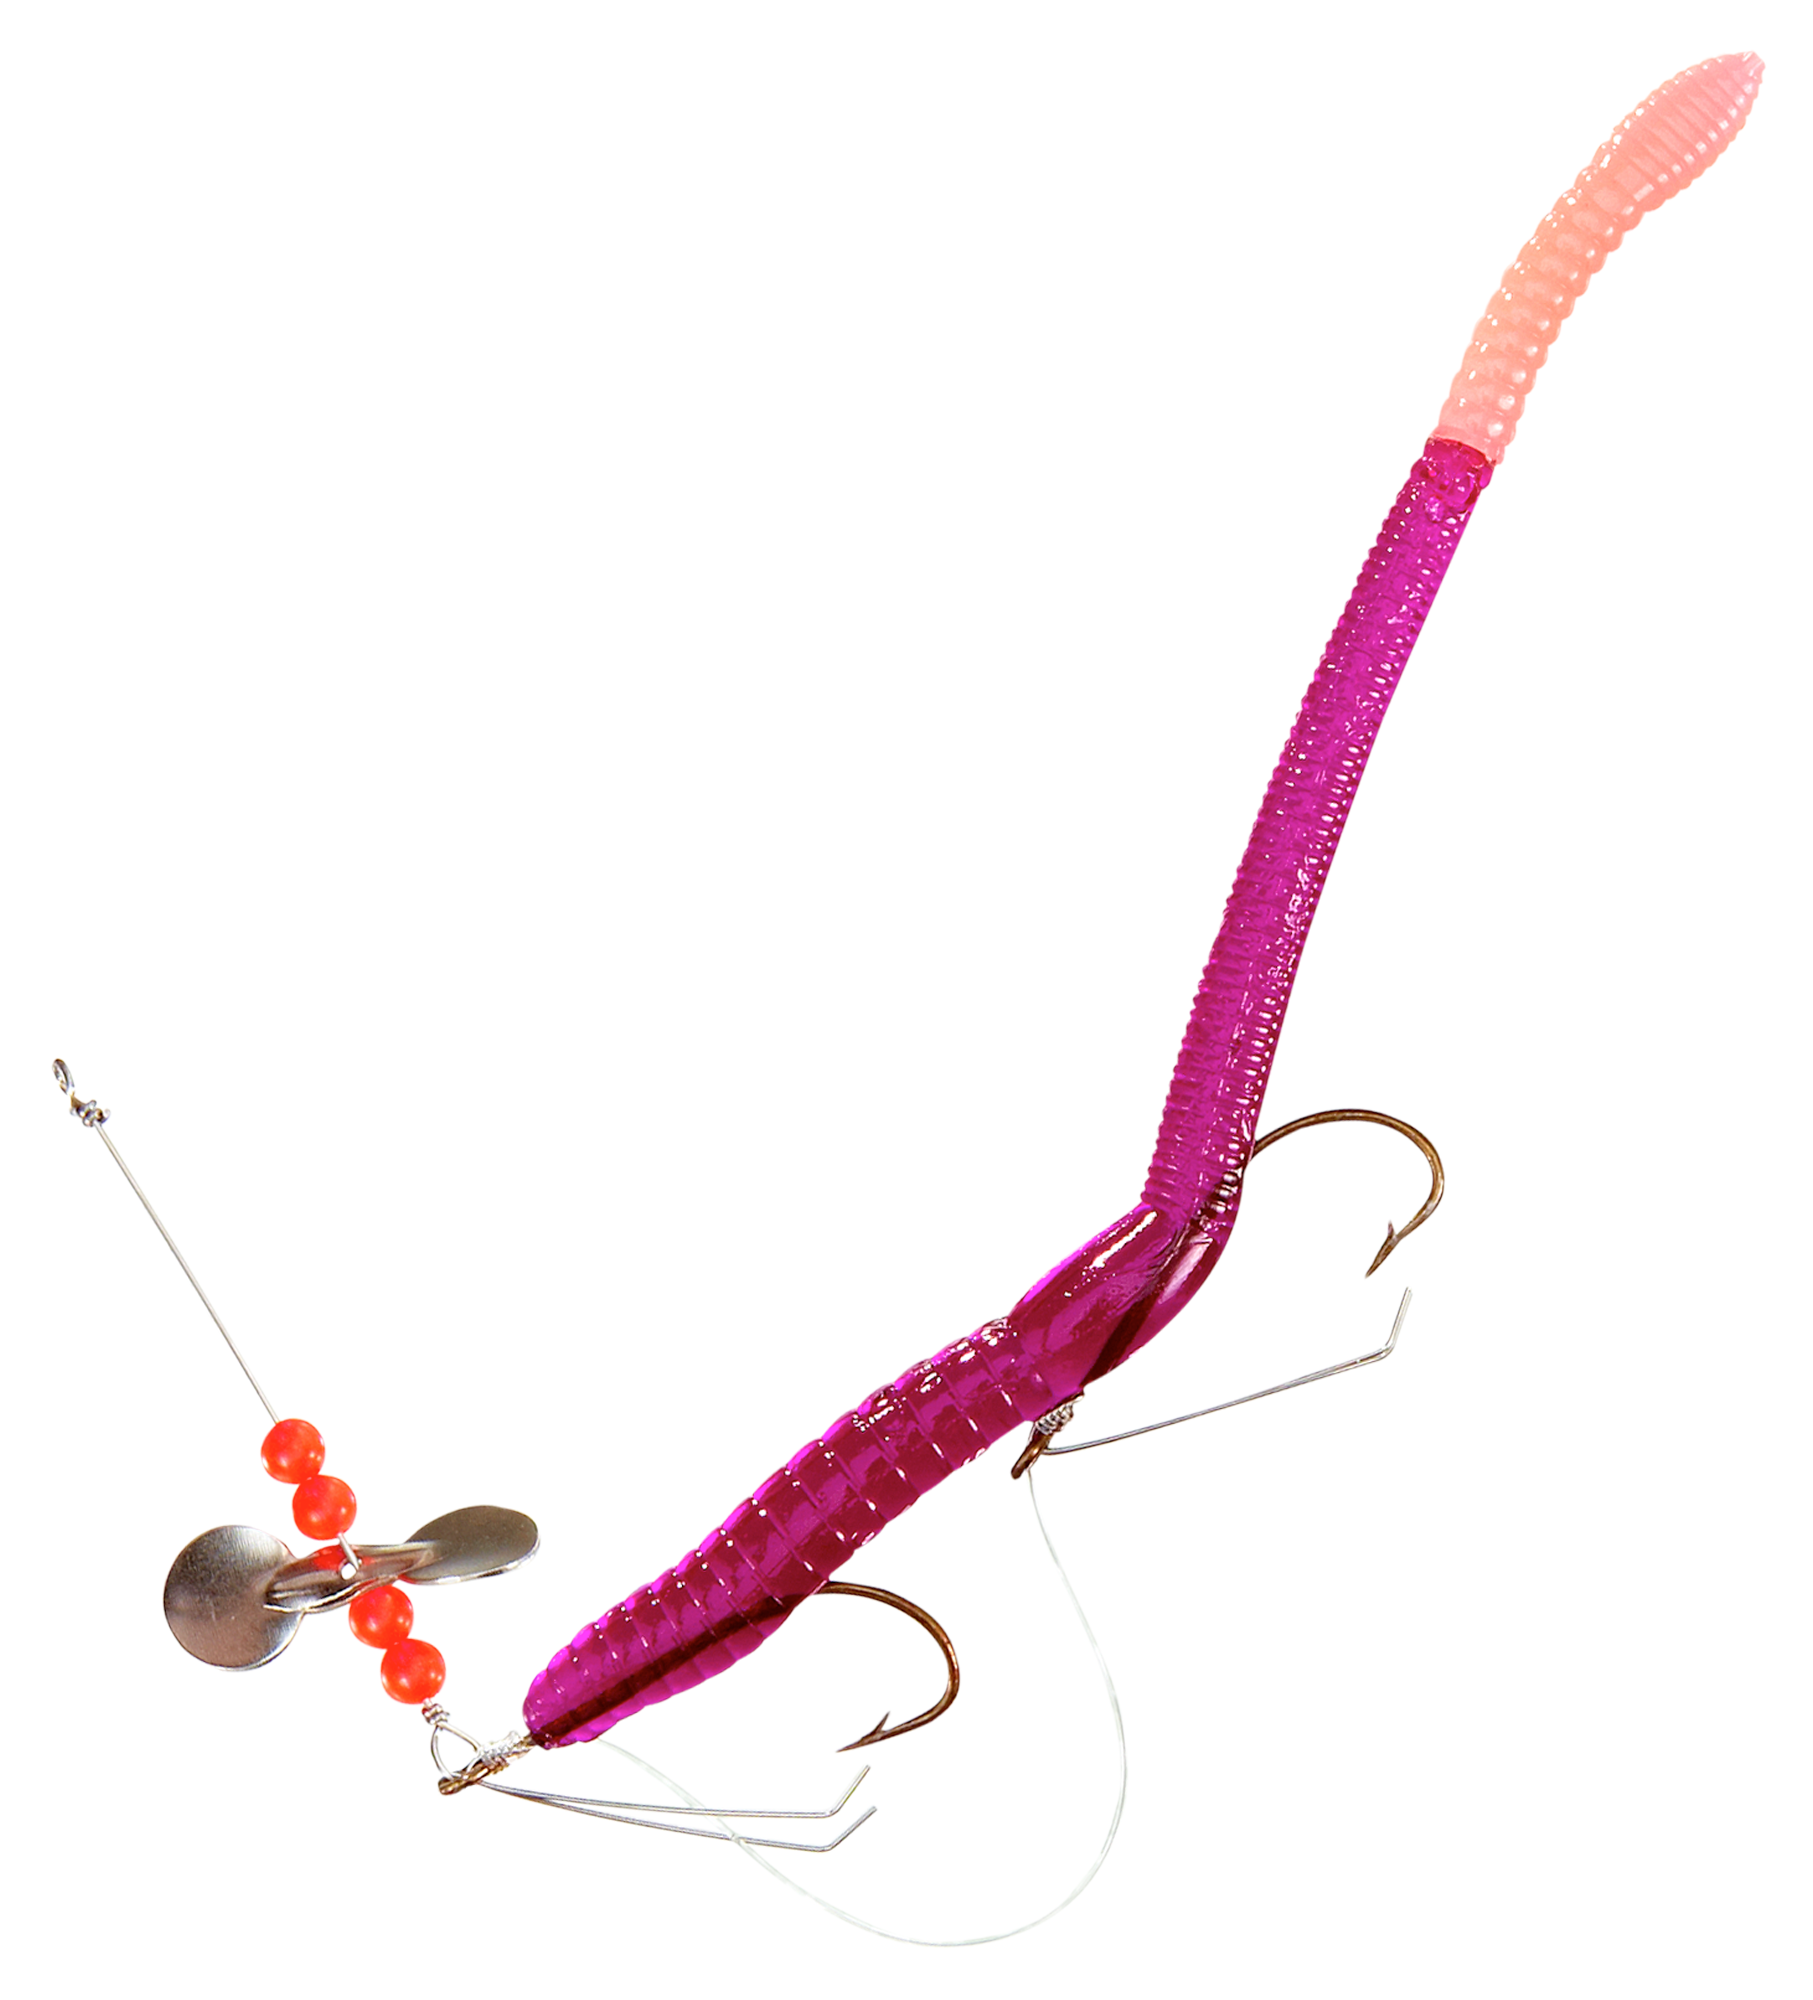 Creme 6 inch Pre-Rigged Weedless Scoundrel Worm, Live